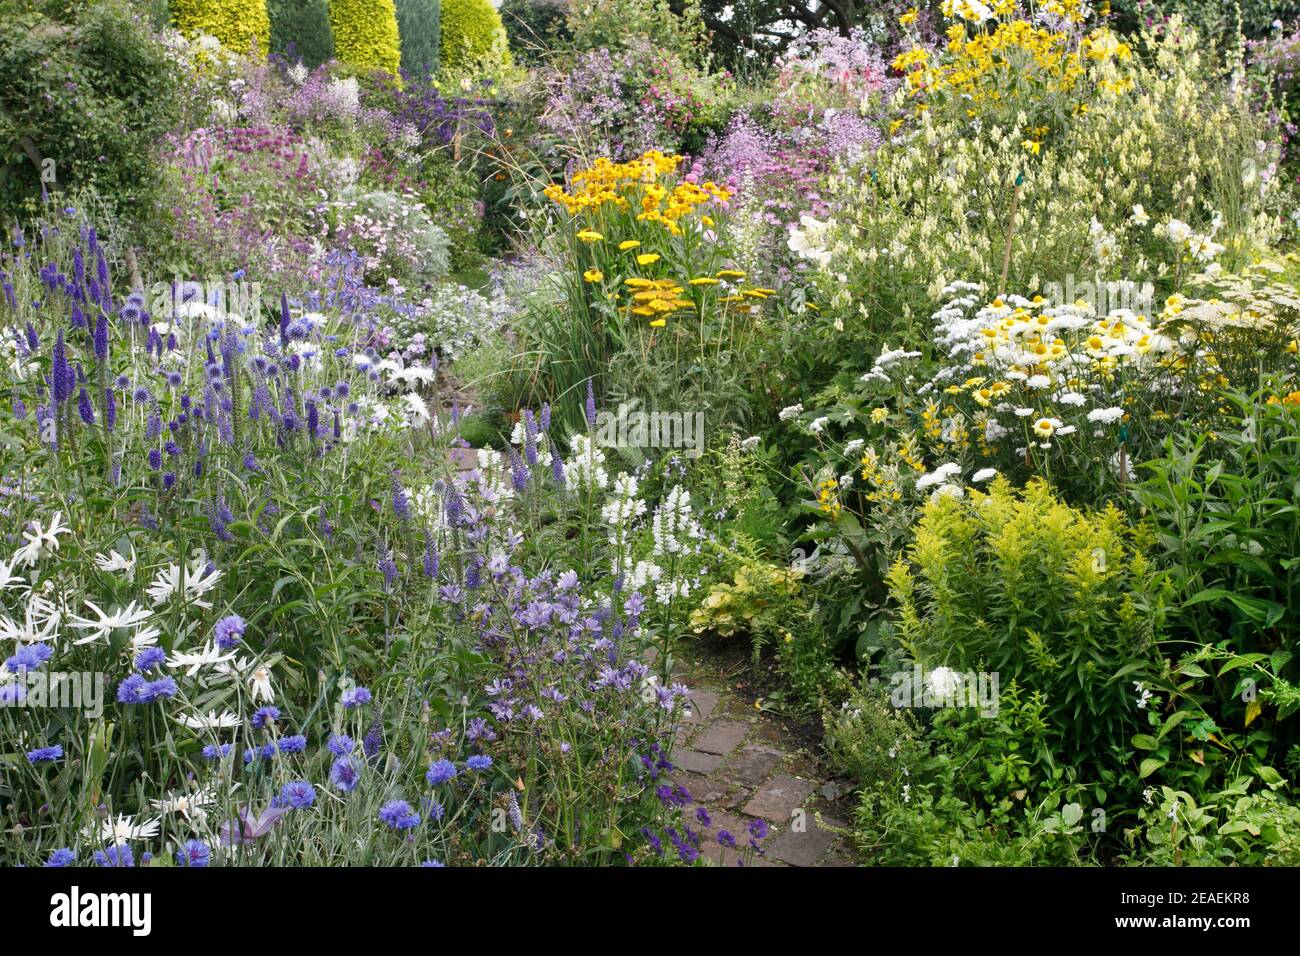 contrasting borders of purple and yellow summer flowers at Grafton Cottage, Barton-Under-Needwood, Staffordshire, NGS, July Stock Photo